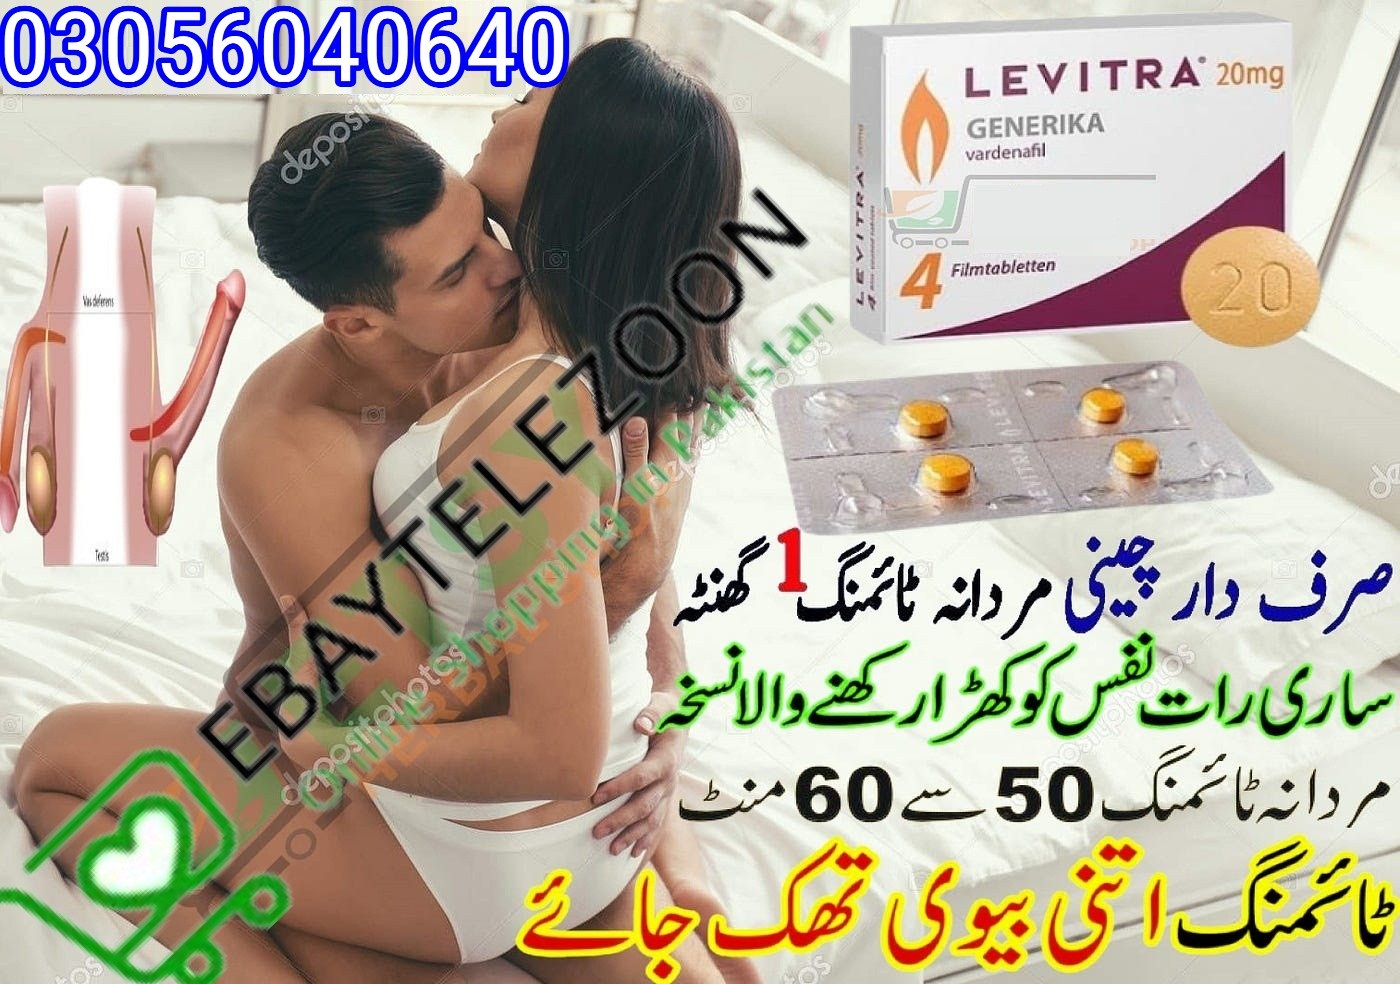 Levitra Tablets in Hyderabad – 0305-6040640